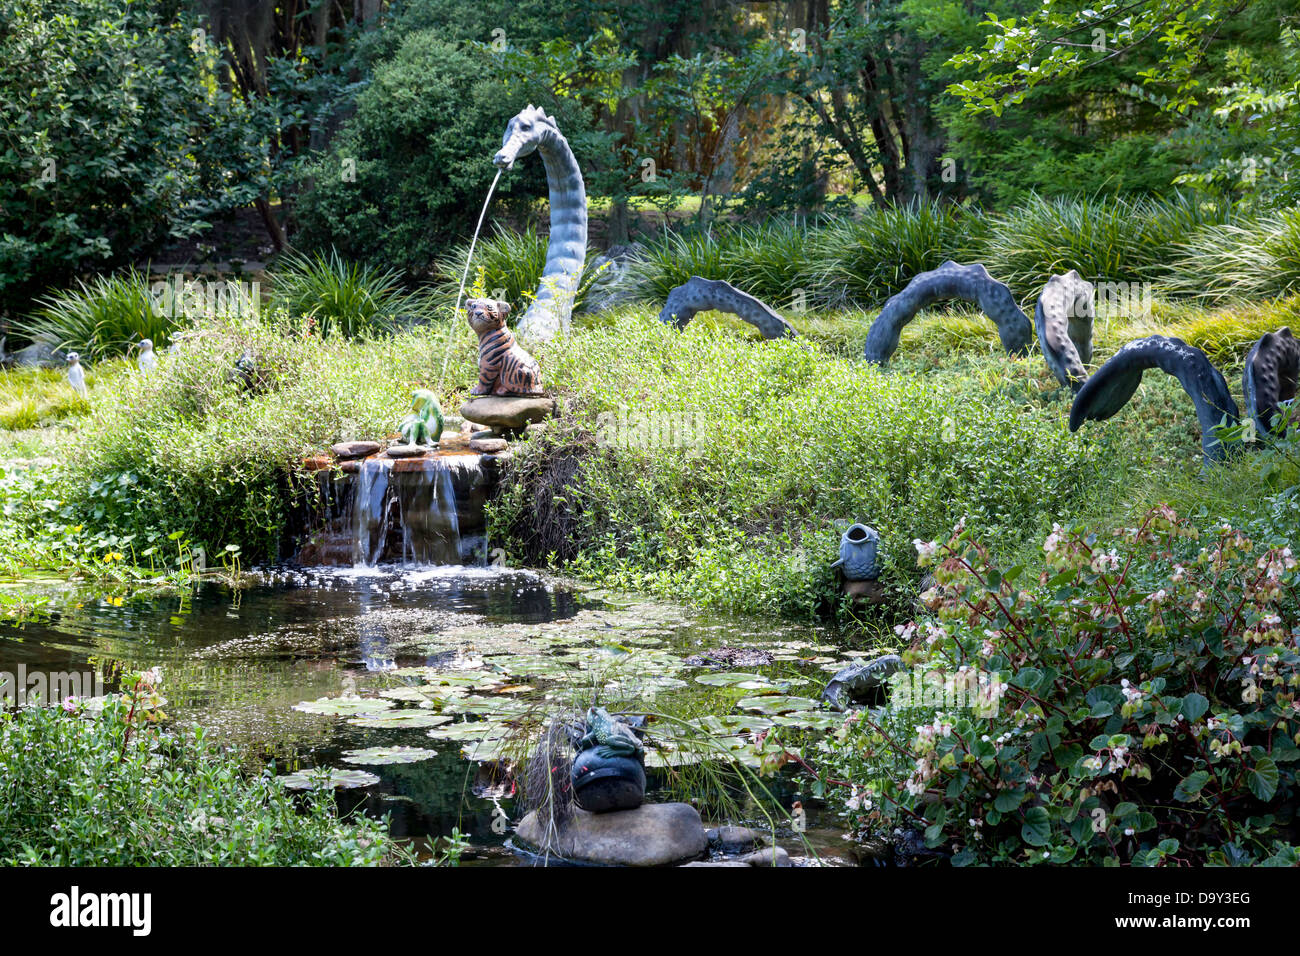 Whimsical dragons and other garden sculptures on display around a pond and waterfall in childrens' garden of Kanapaha Gardens. Stock Photo